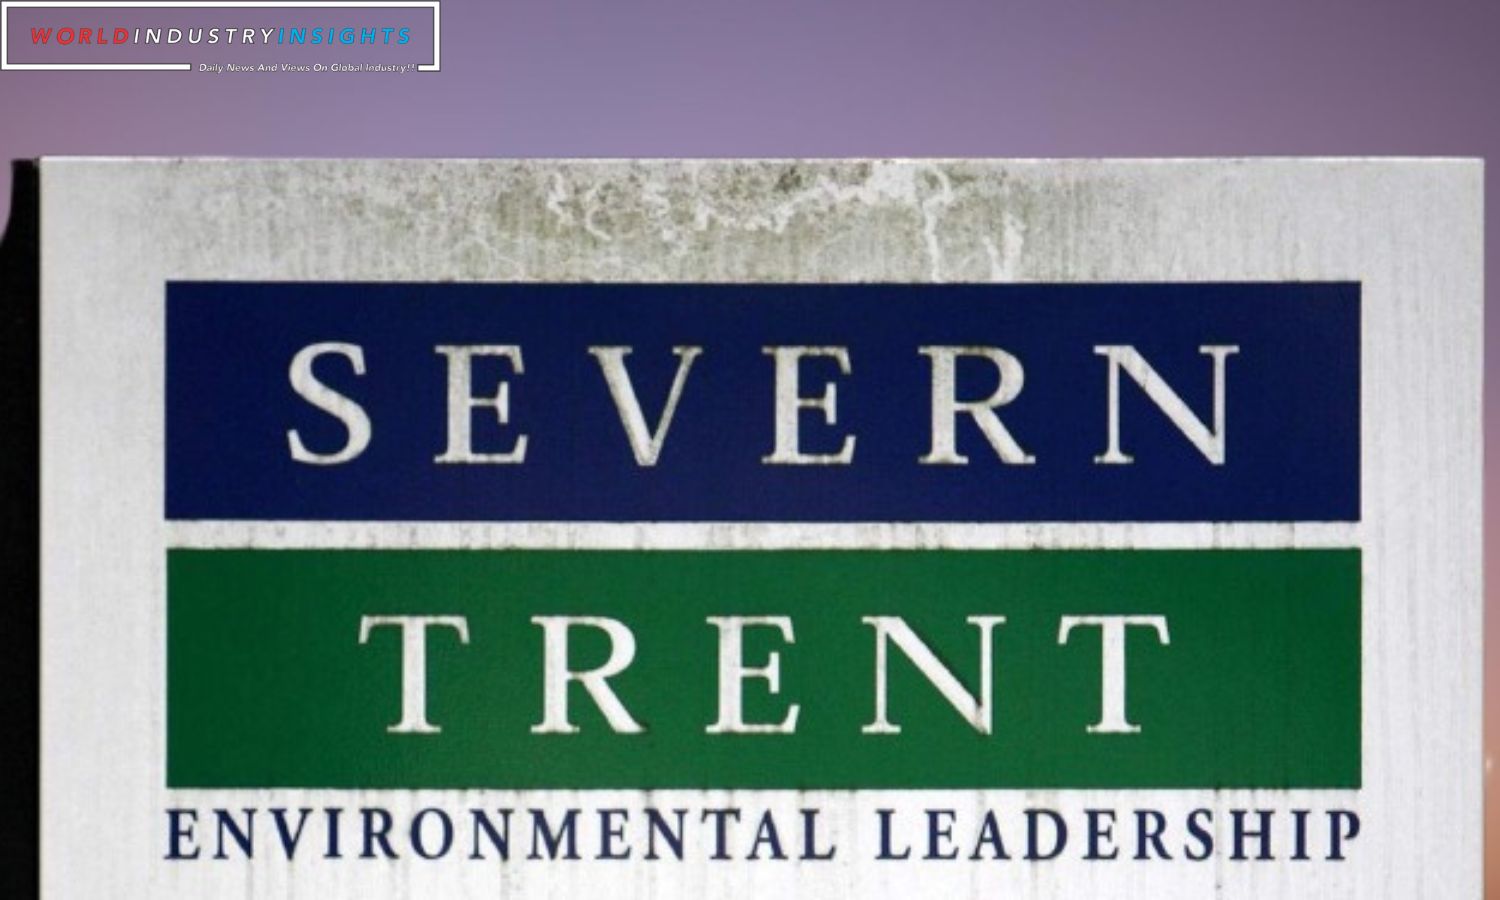 Severn Trent Watershed Moment